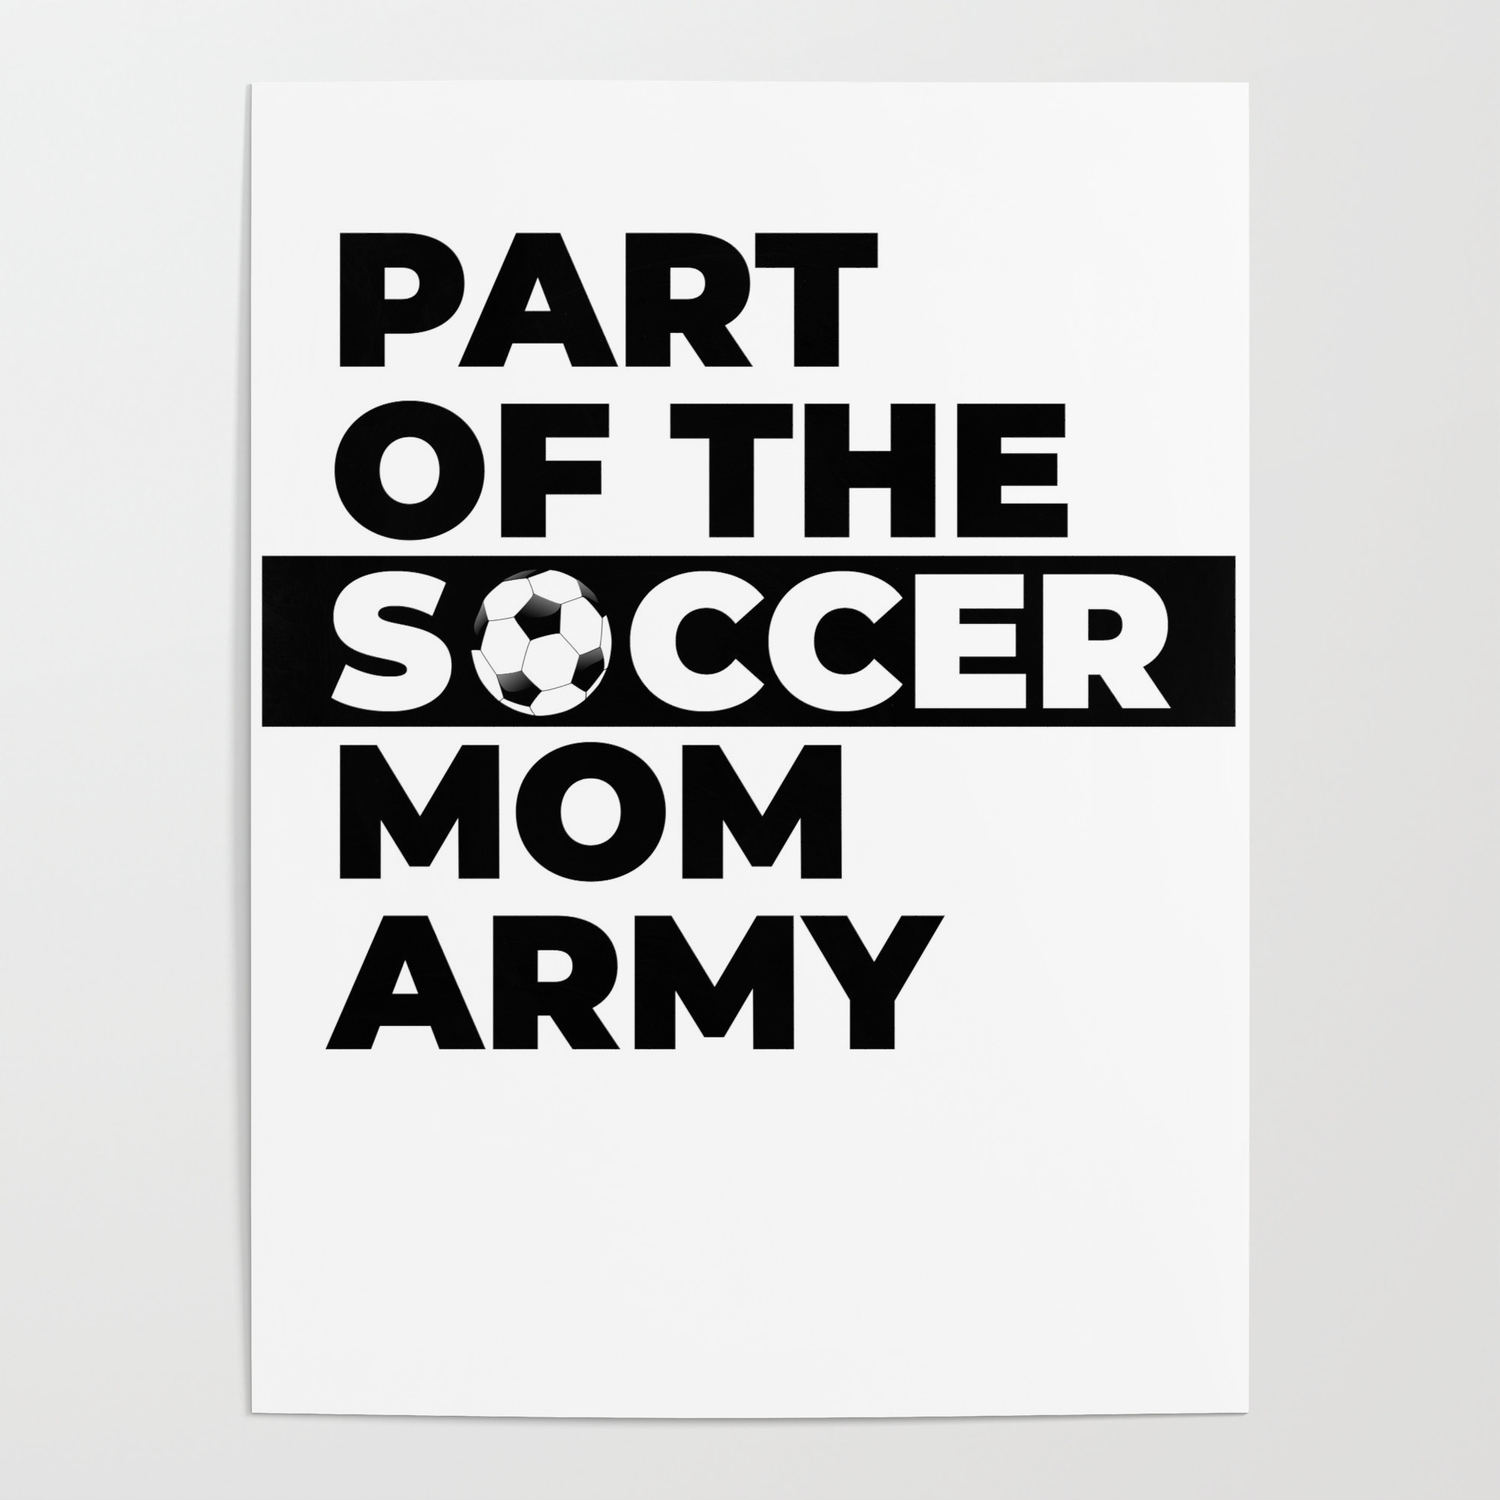 Funny Part of the soccer mom army gift idea Poster by Lunaco | Society6